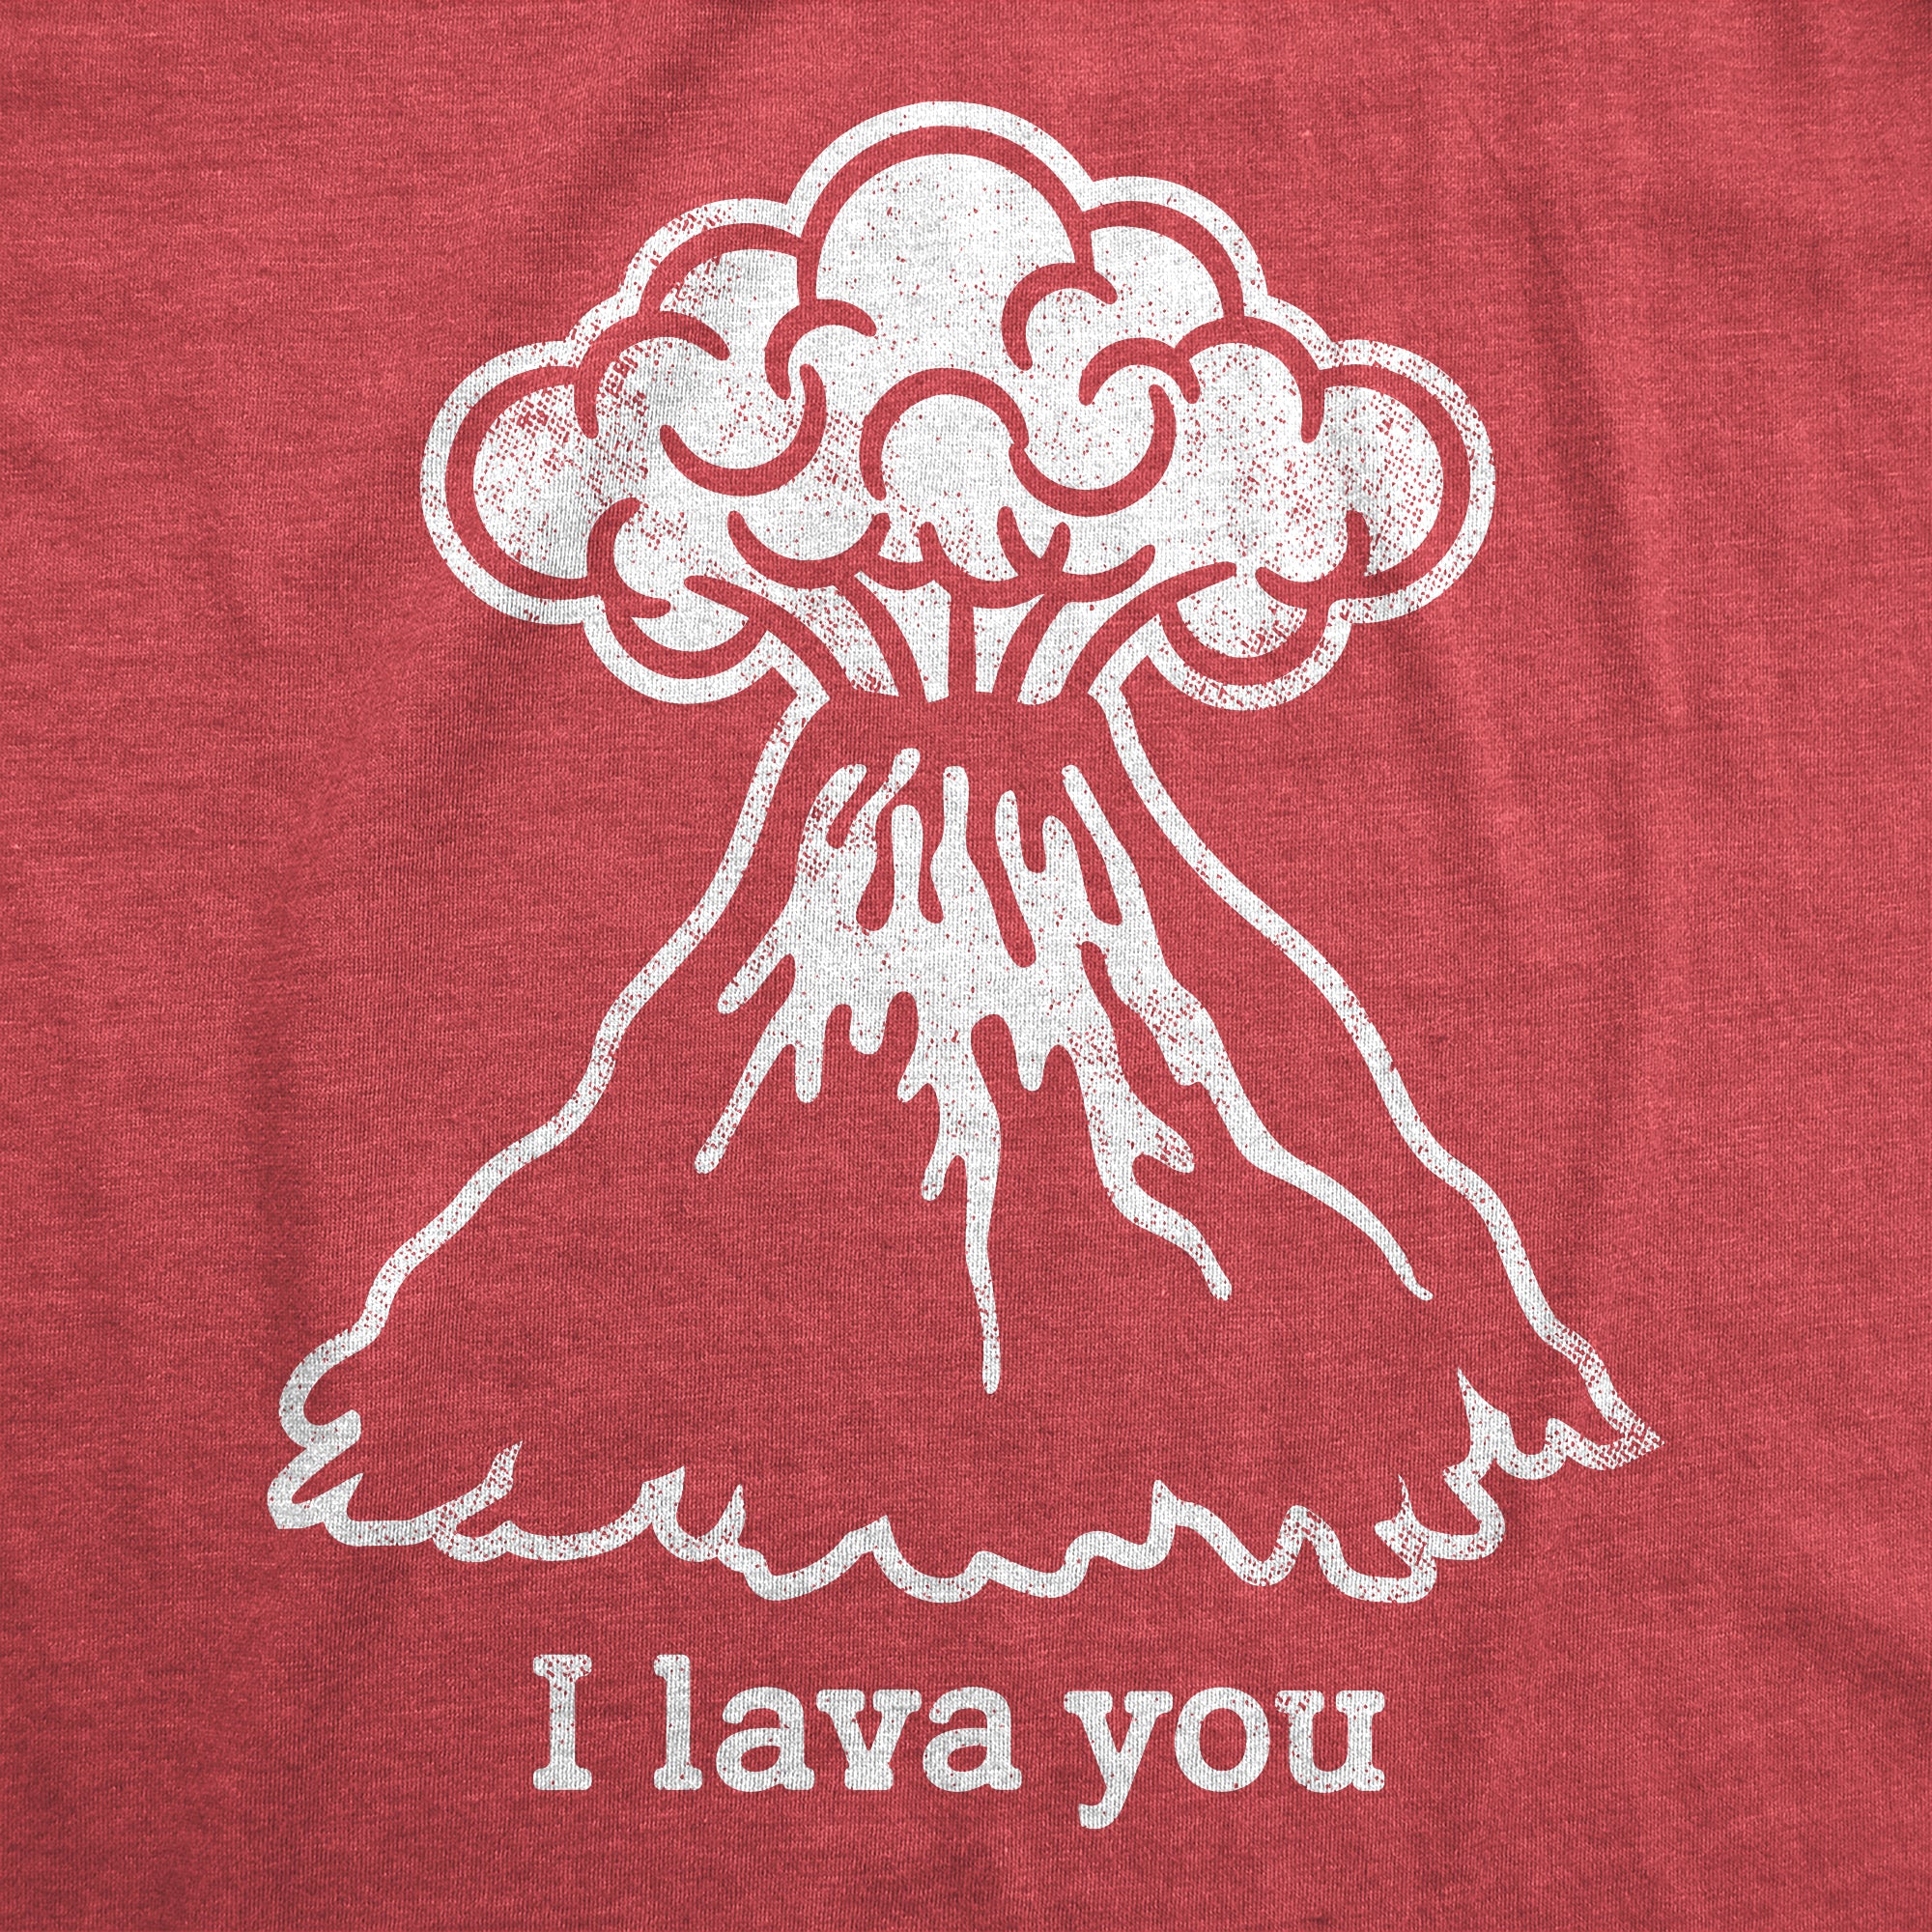 Funny Heather Red I Lava You Mens T Shirt Nerdy Valentine's Day Tee